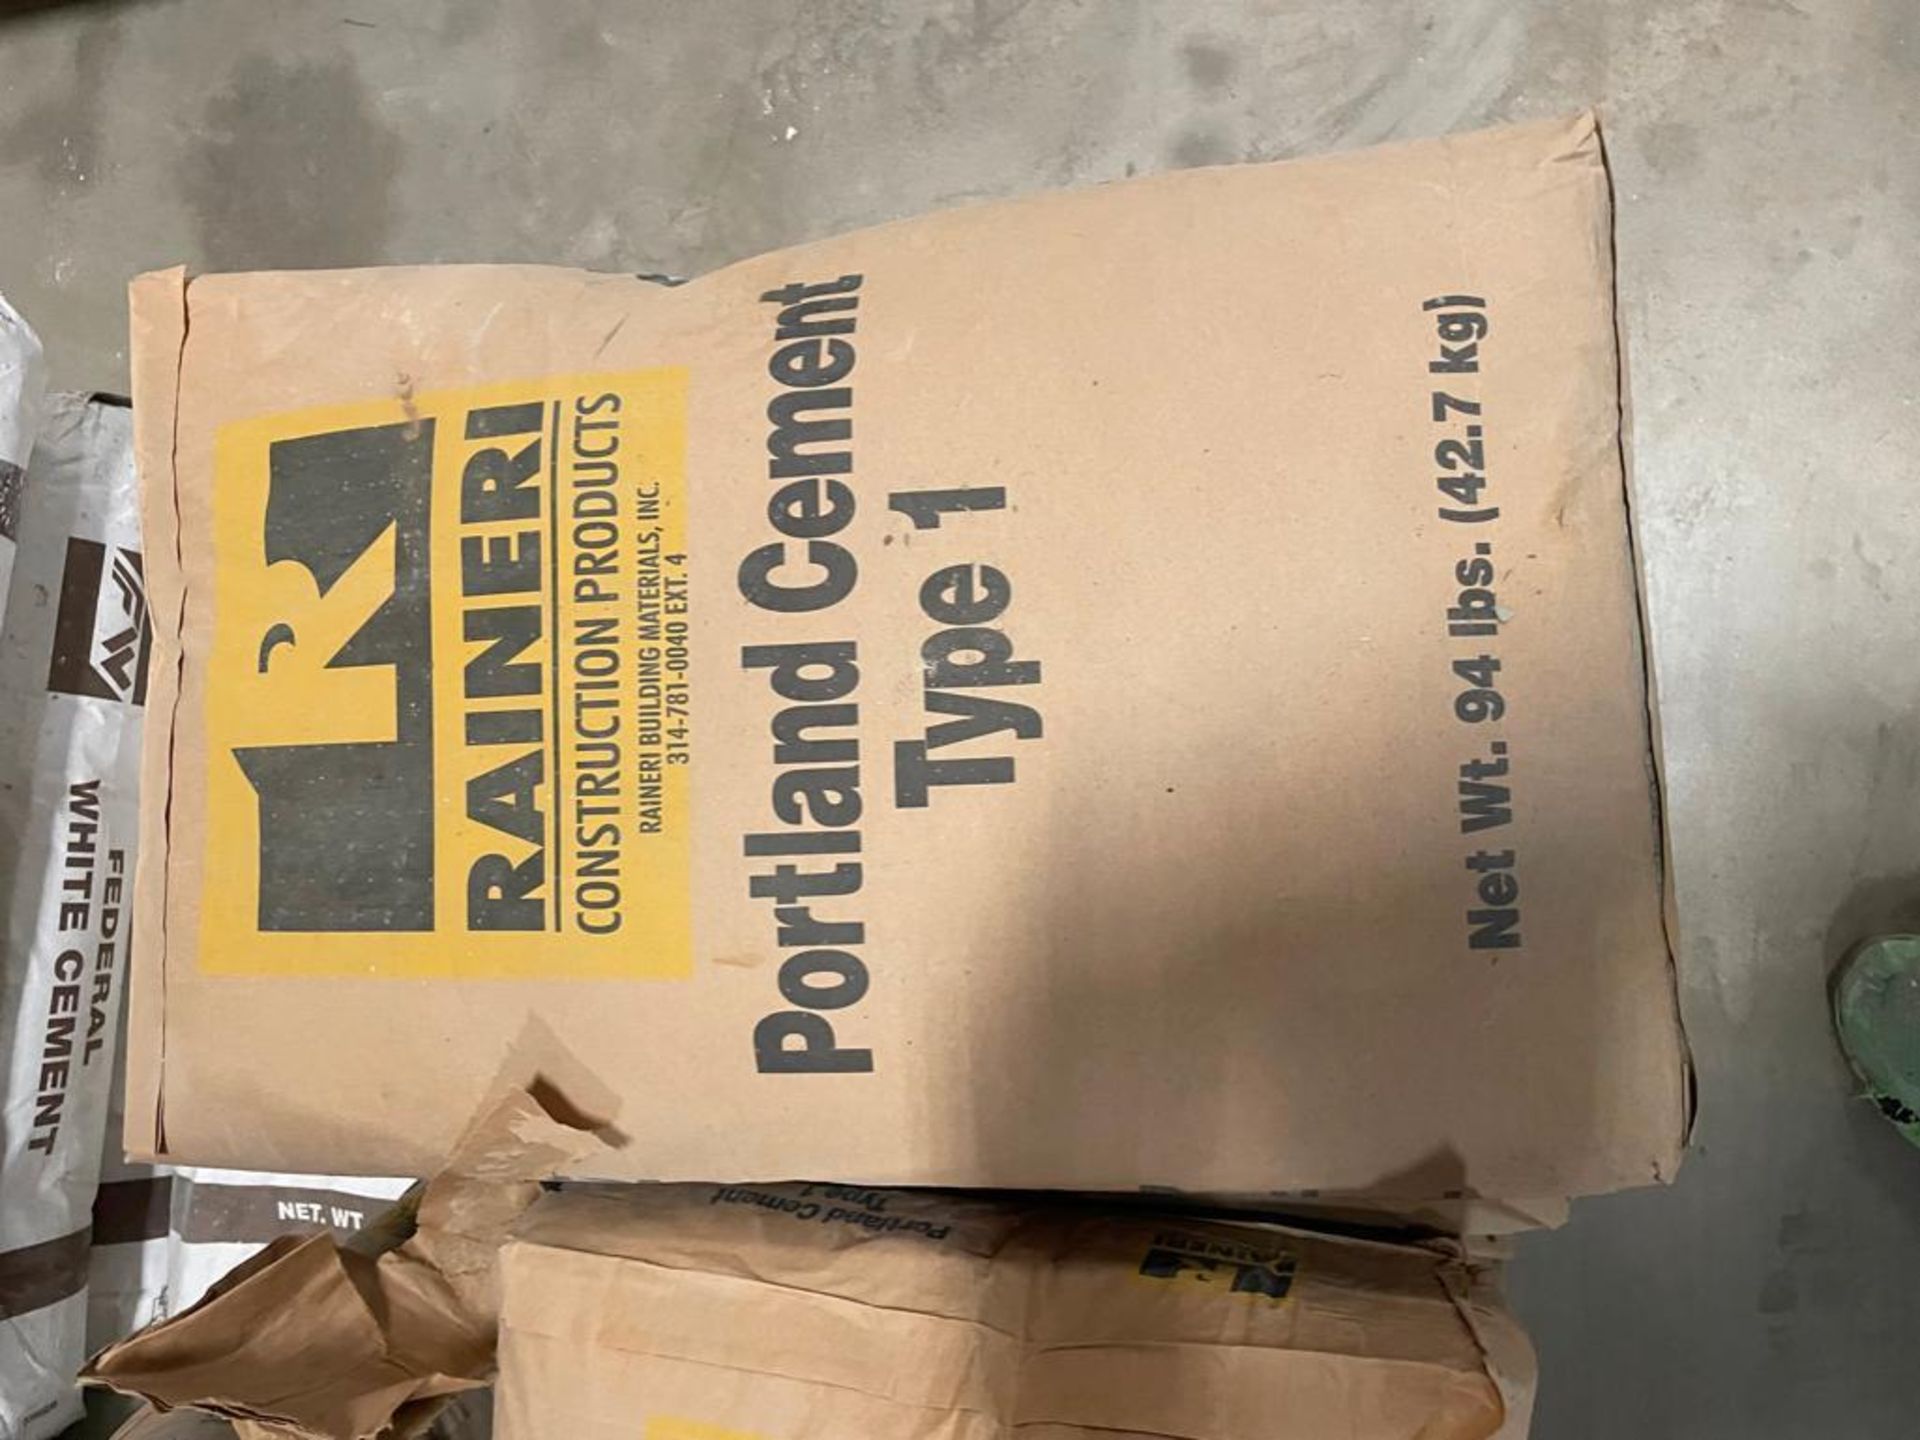 Pallet of Federal White Cement & Rainer Portland Cement Type 1. Located in Hazelwood, MO - Image 4 of 5